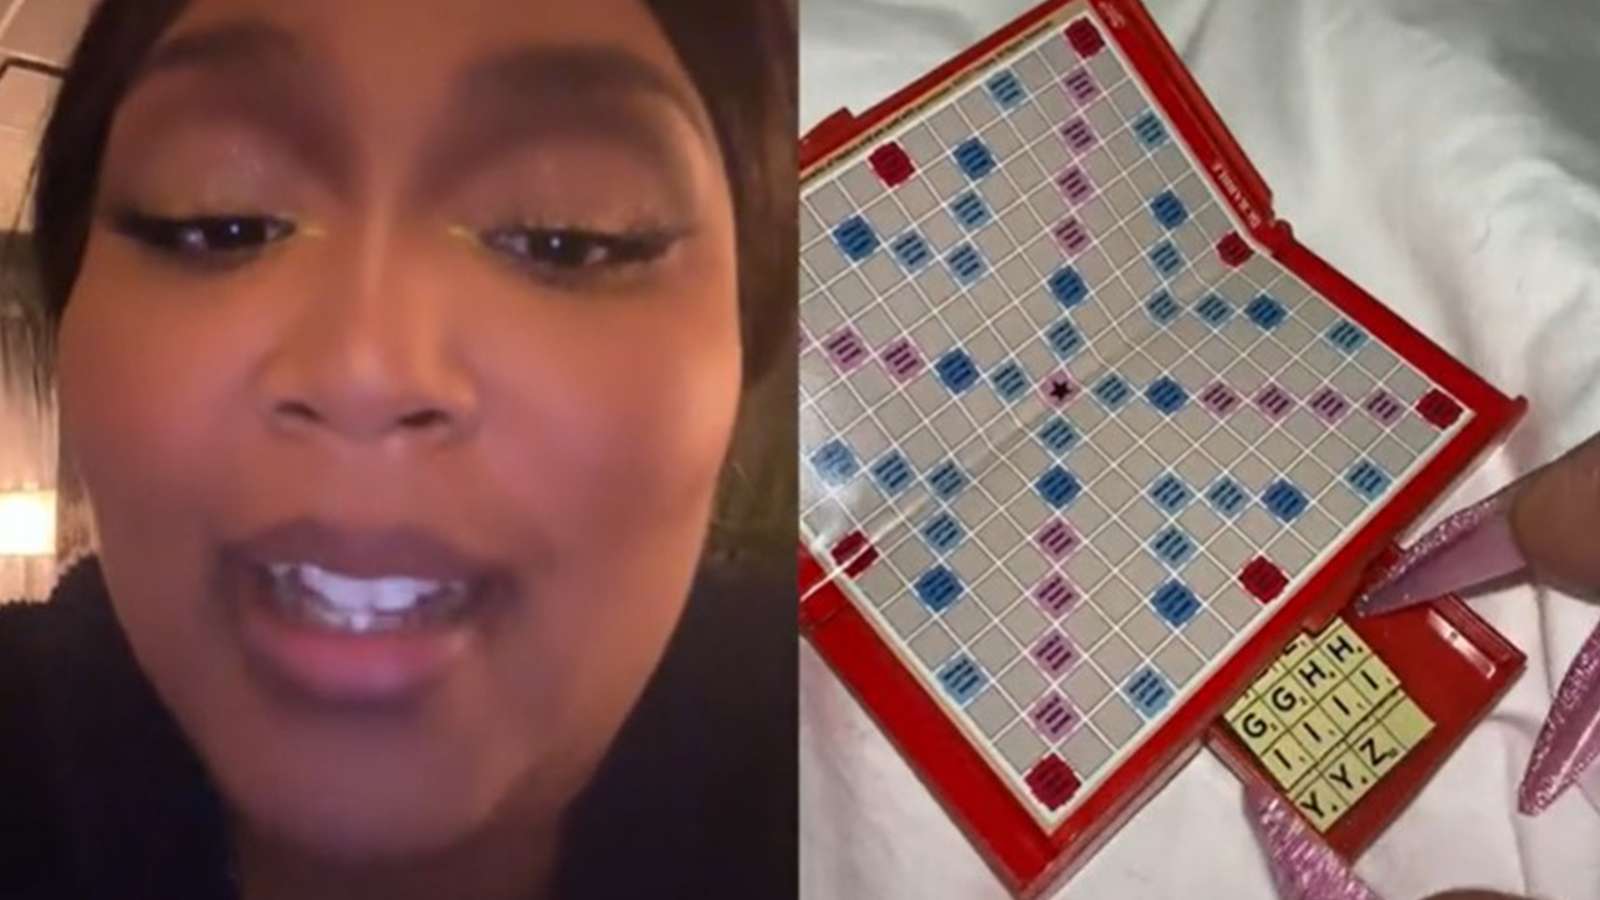 Lizzo trolls fans with worlds smallest scrabble set